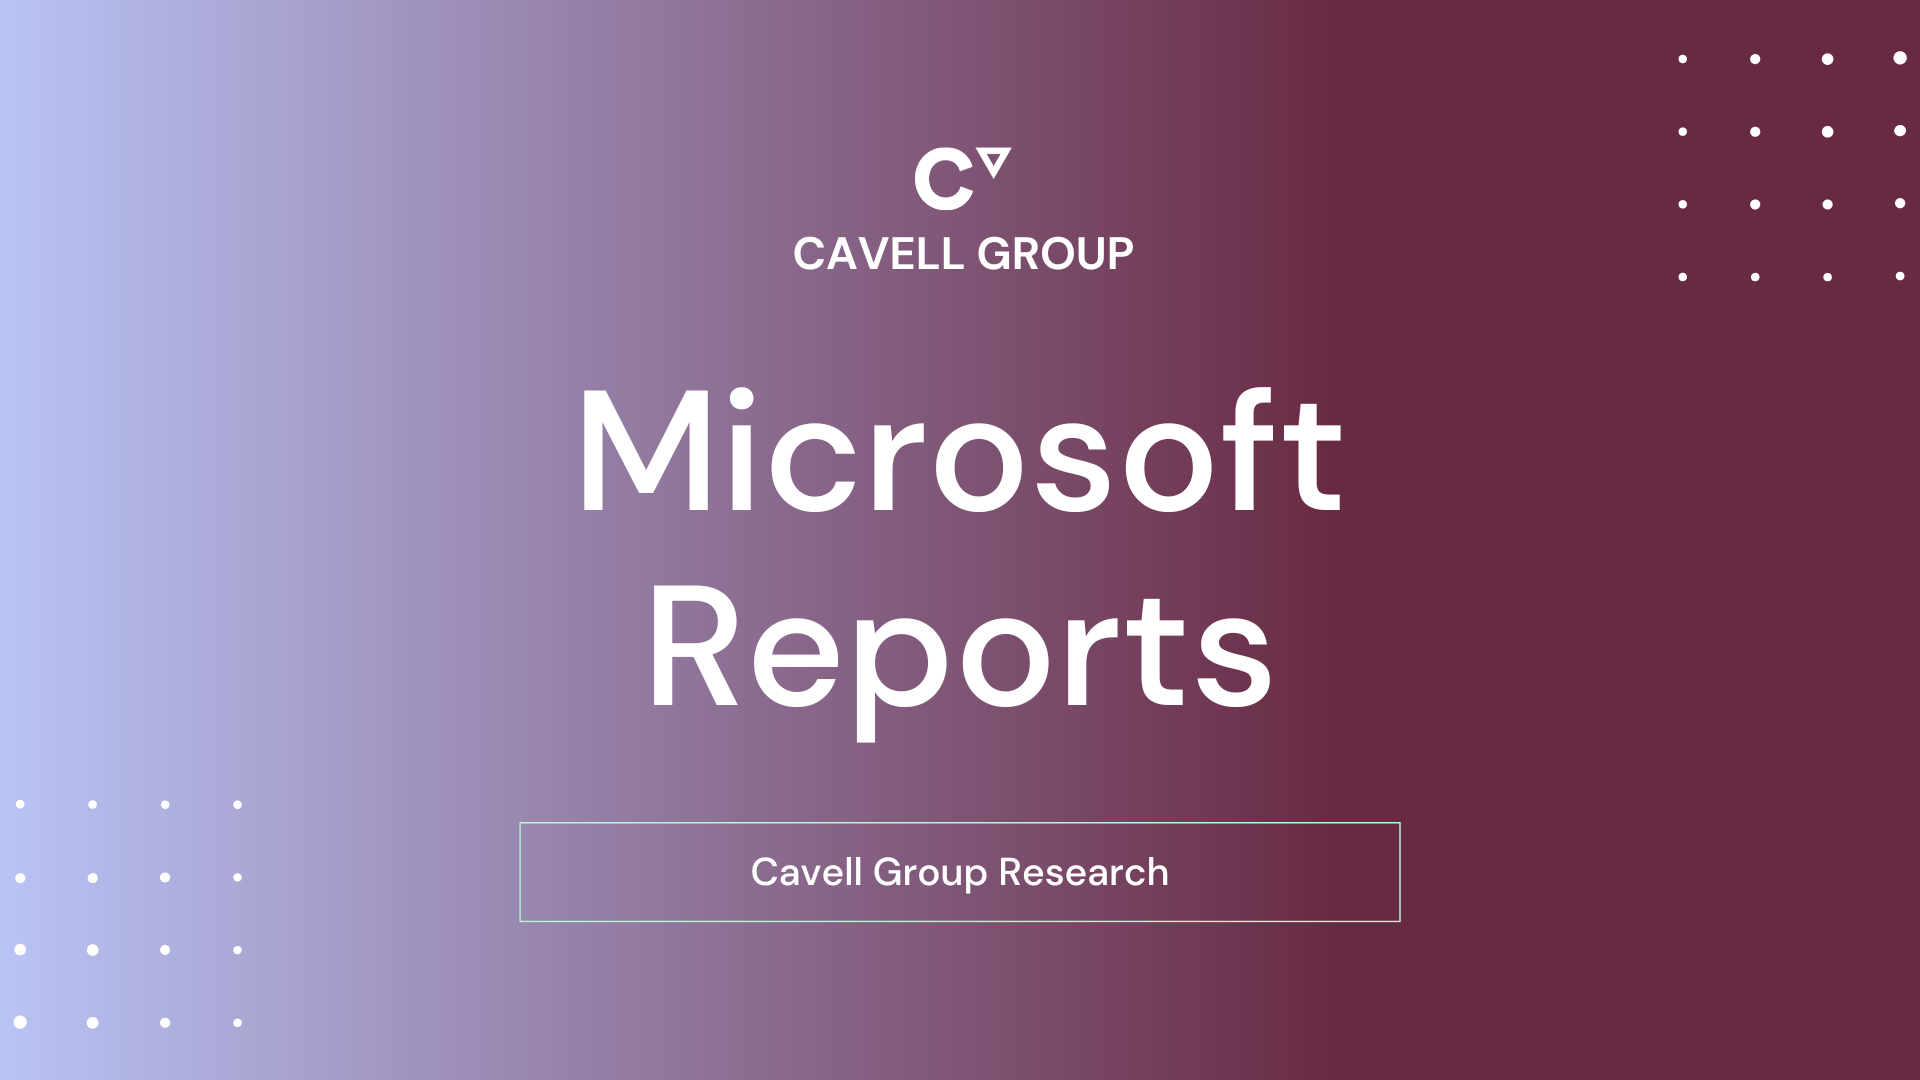 Cavell Group Research: Microsoft Reports